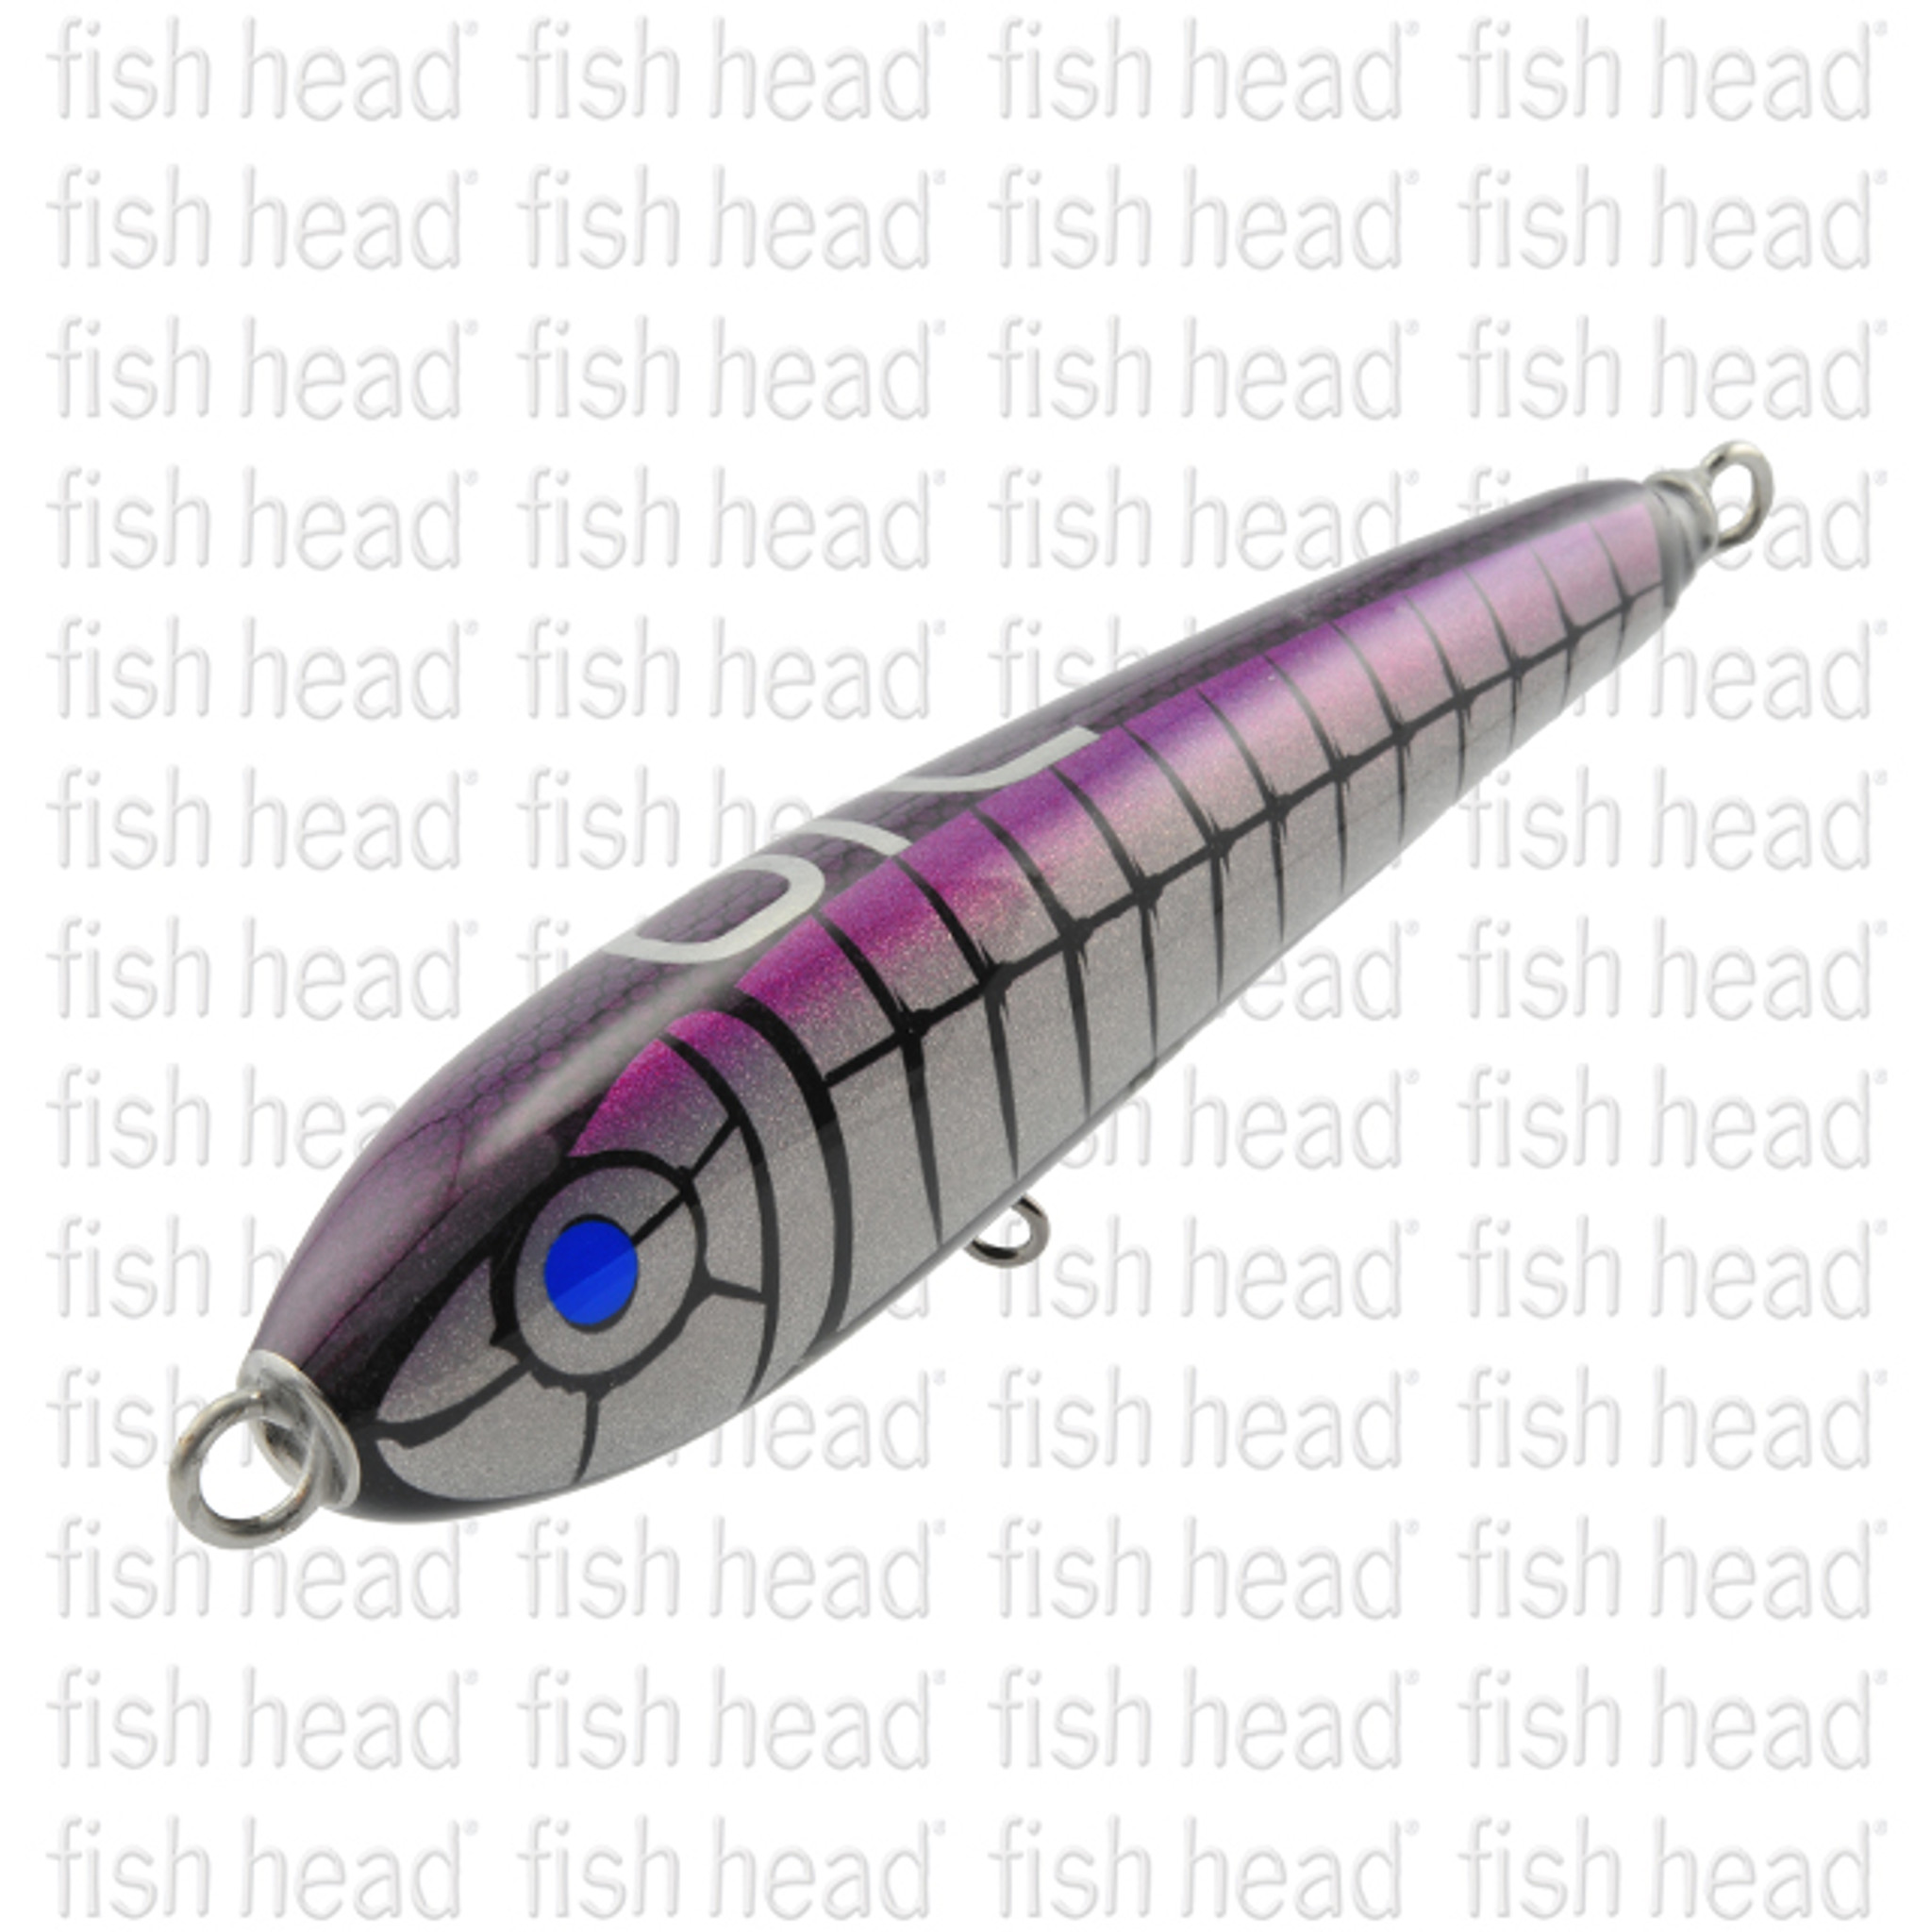 On Top Lures 50g Chop Floating Stickbait - Fish Head